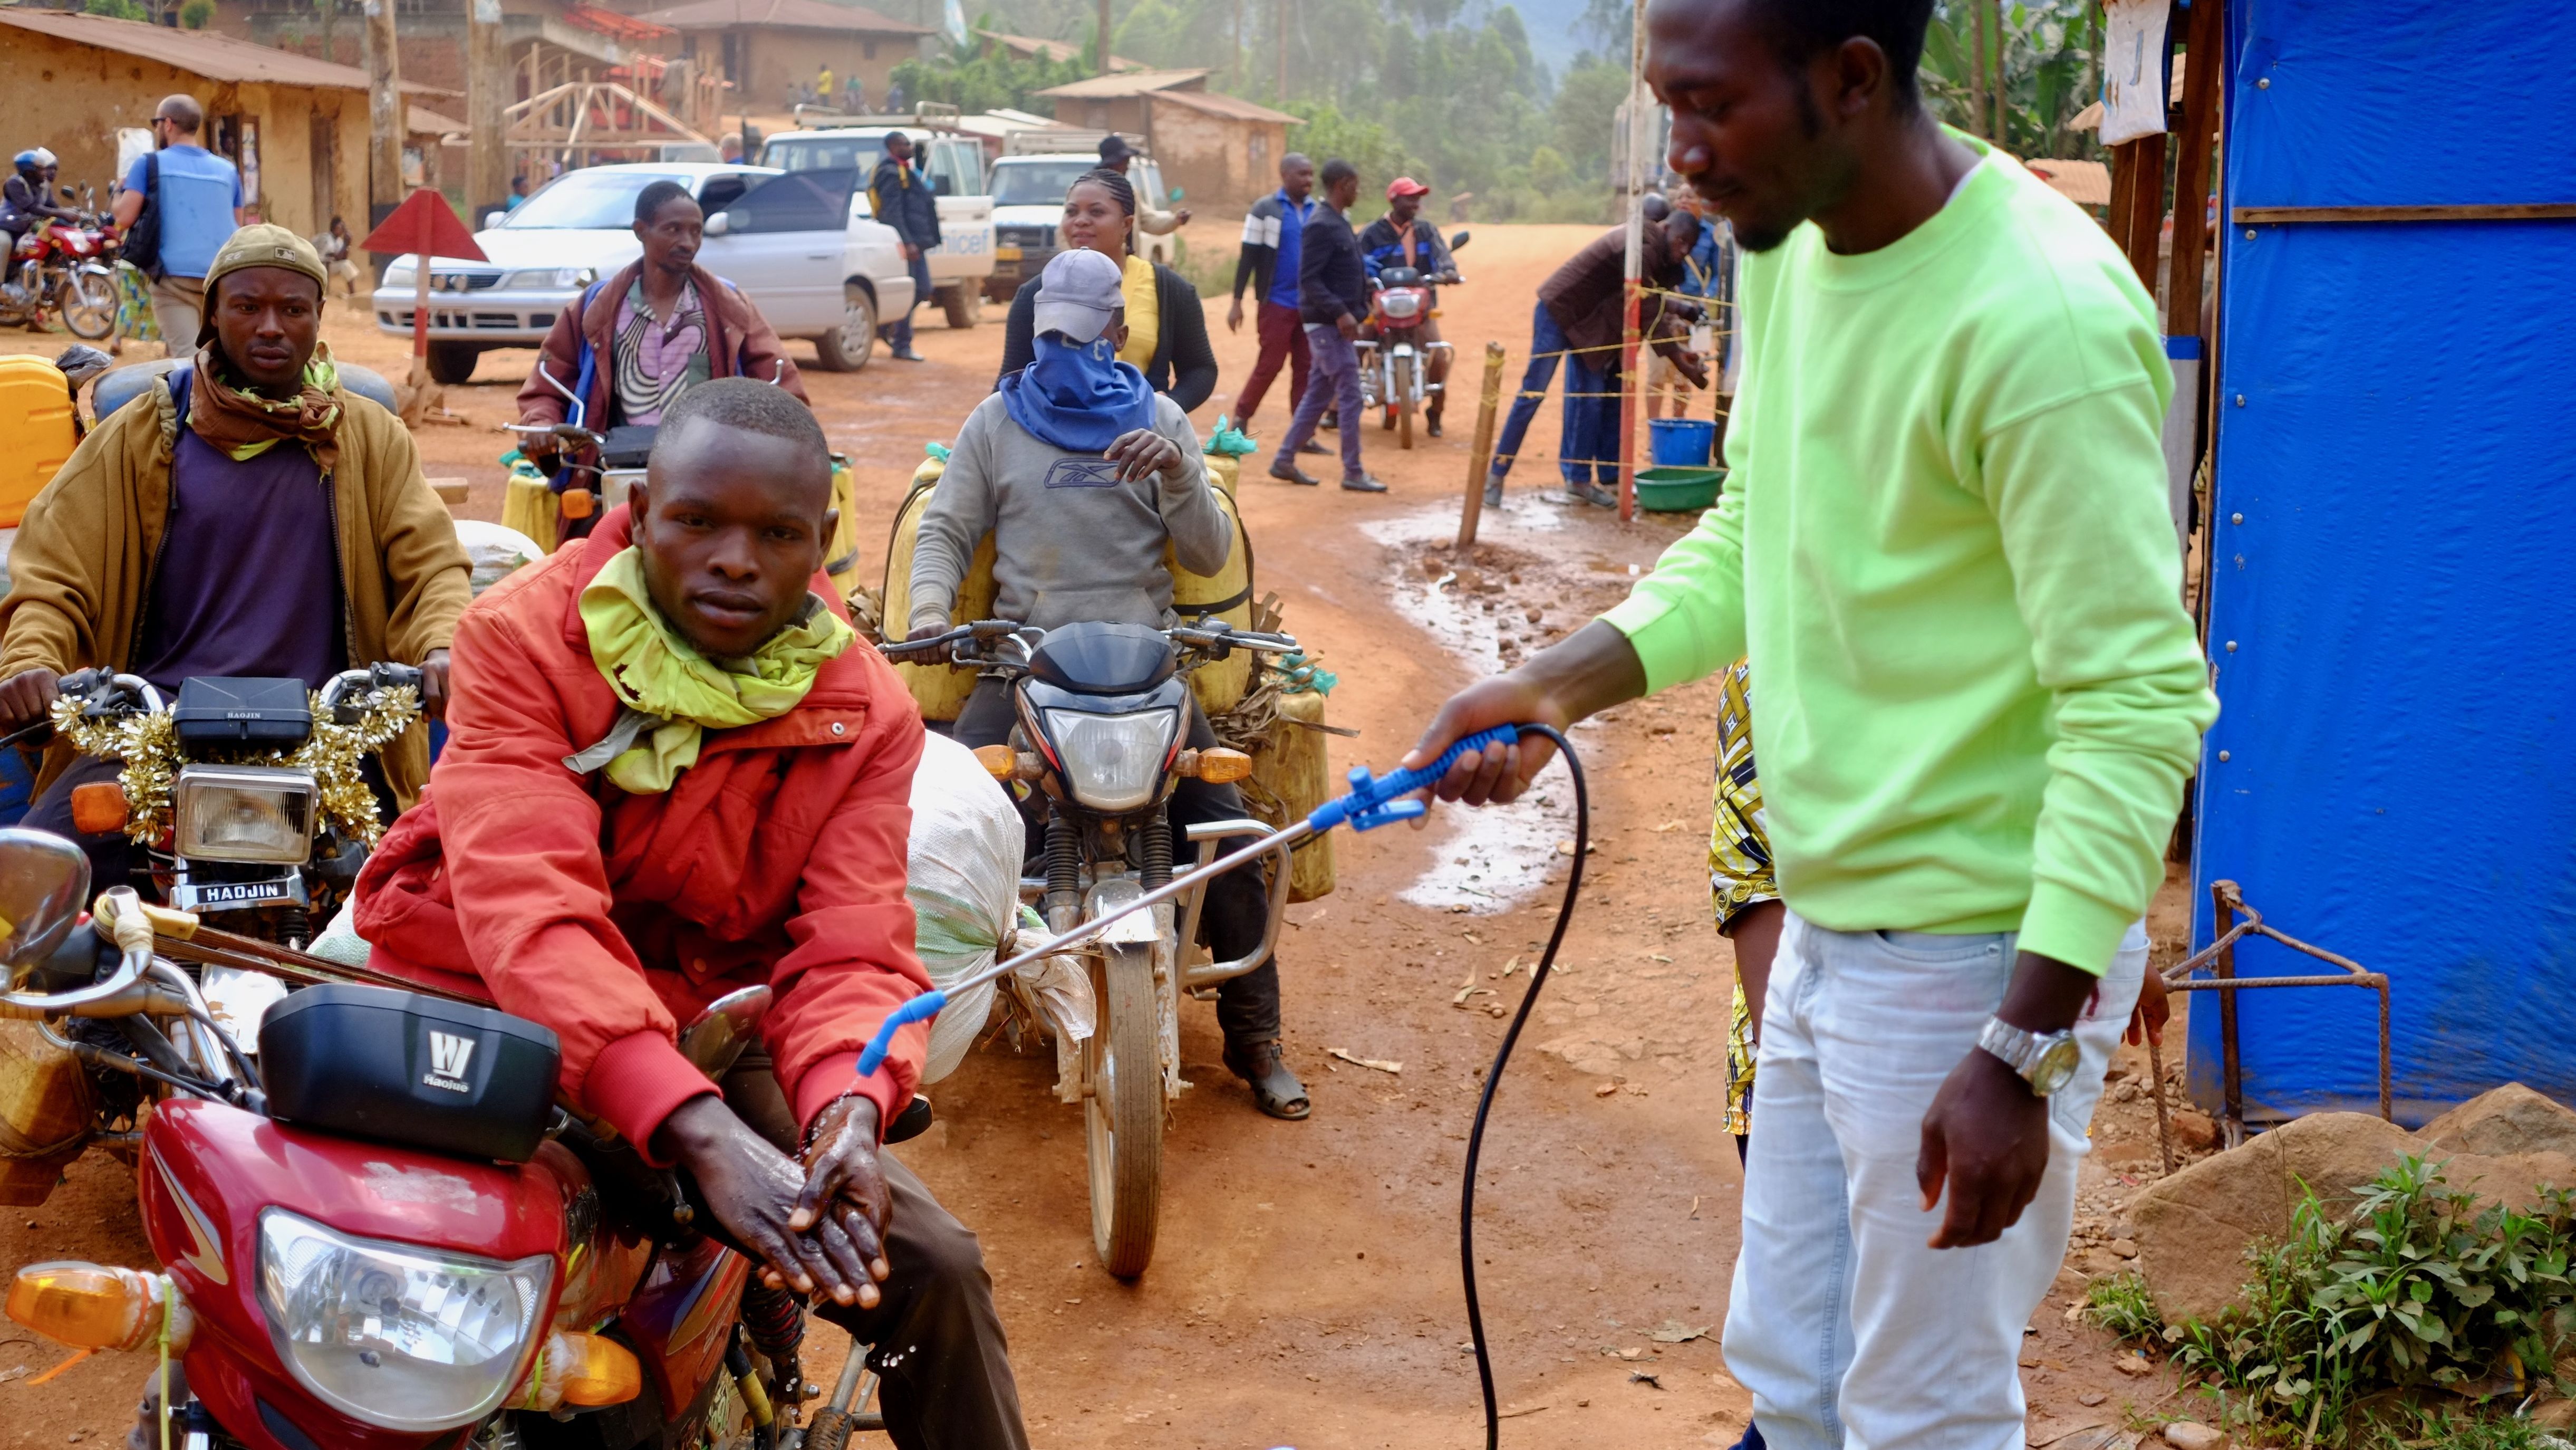 A motorcycle taxi driver gets his hands washed with a chlorine solution at a checkpoint between Beni and Butembo in estern Democratic Republic of Congo.